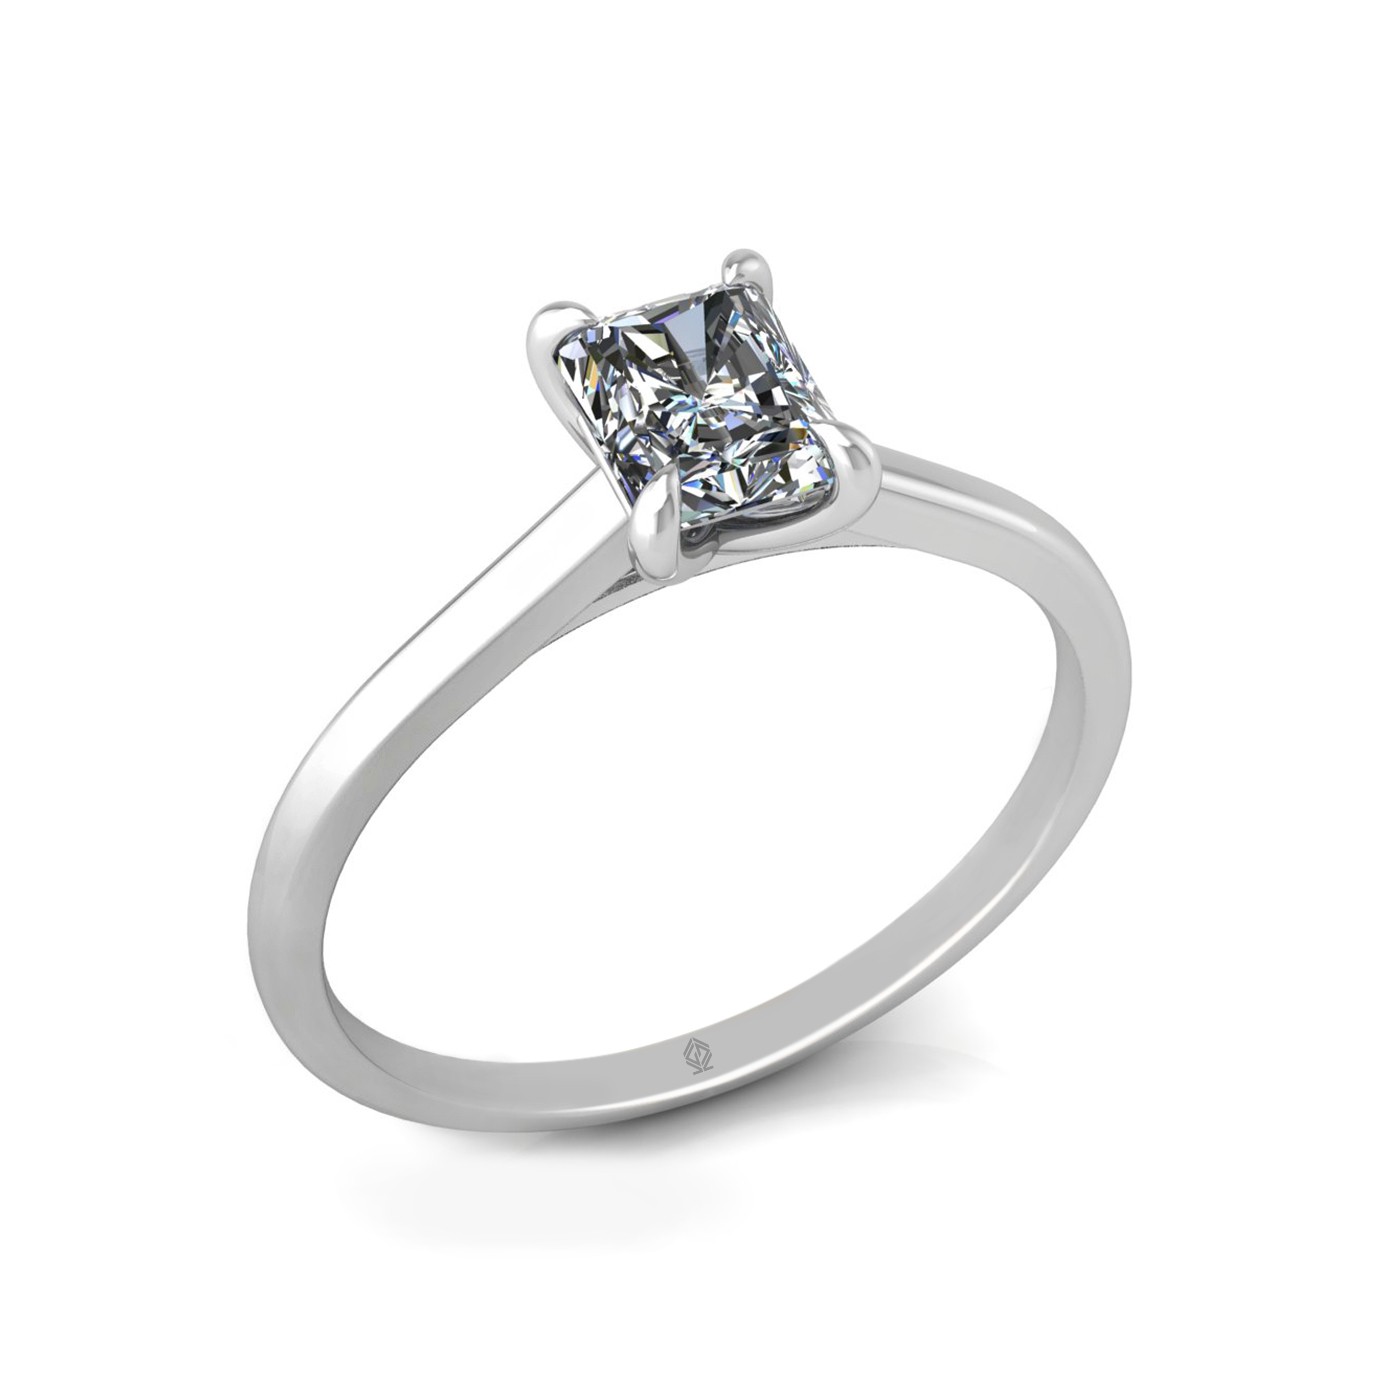 18k white gold  0,80 ct 4 prongs solitaire radiant cut diamond engagement ring with whisper thin band